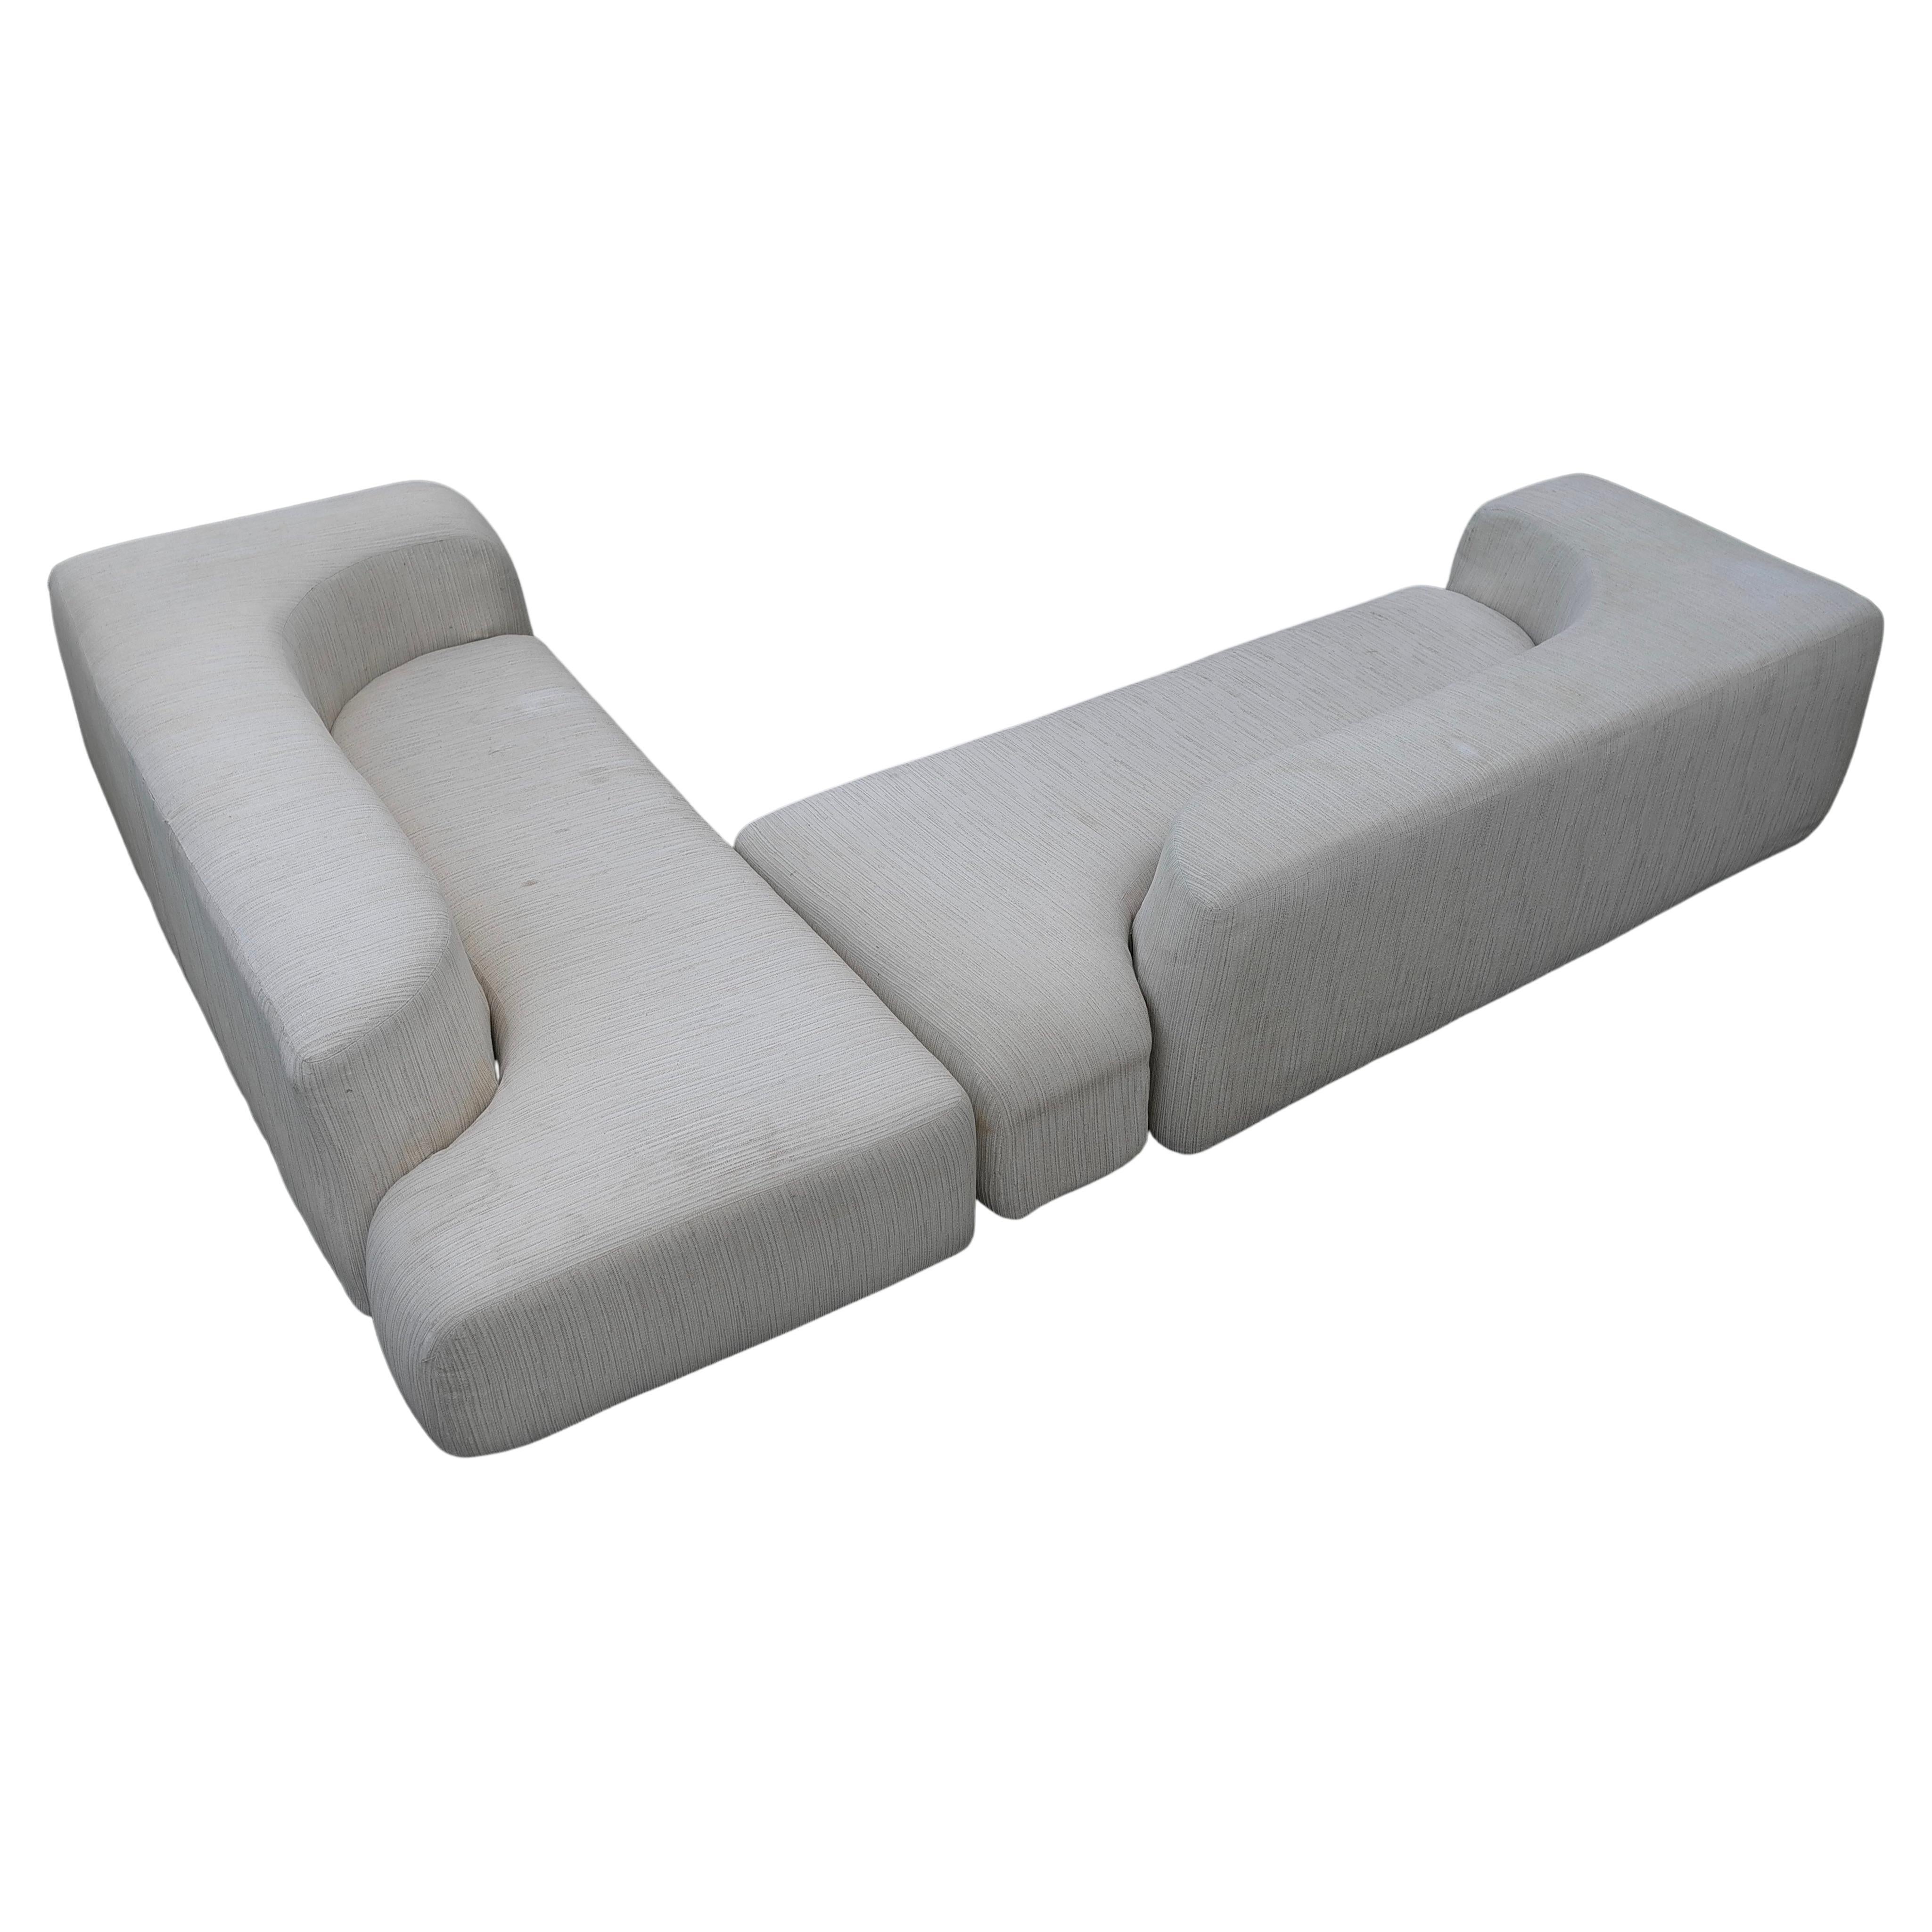 Rare Sculptural sofa by Edoardo Landi for Nikol Internazionale, Italy 1971

With this sofa you not only get comfort in your home, but also a great work of Art. 
The sofa creates a shell-like environment that cocoons the sitter. With your own